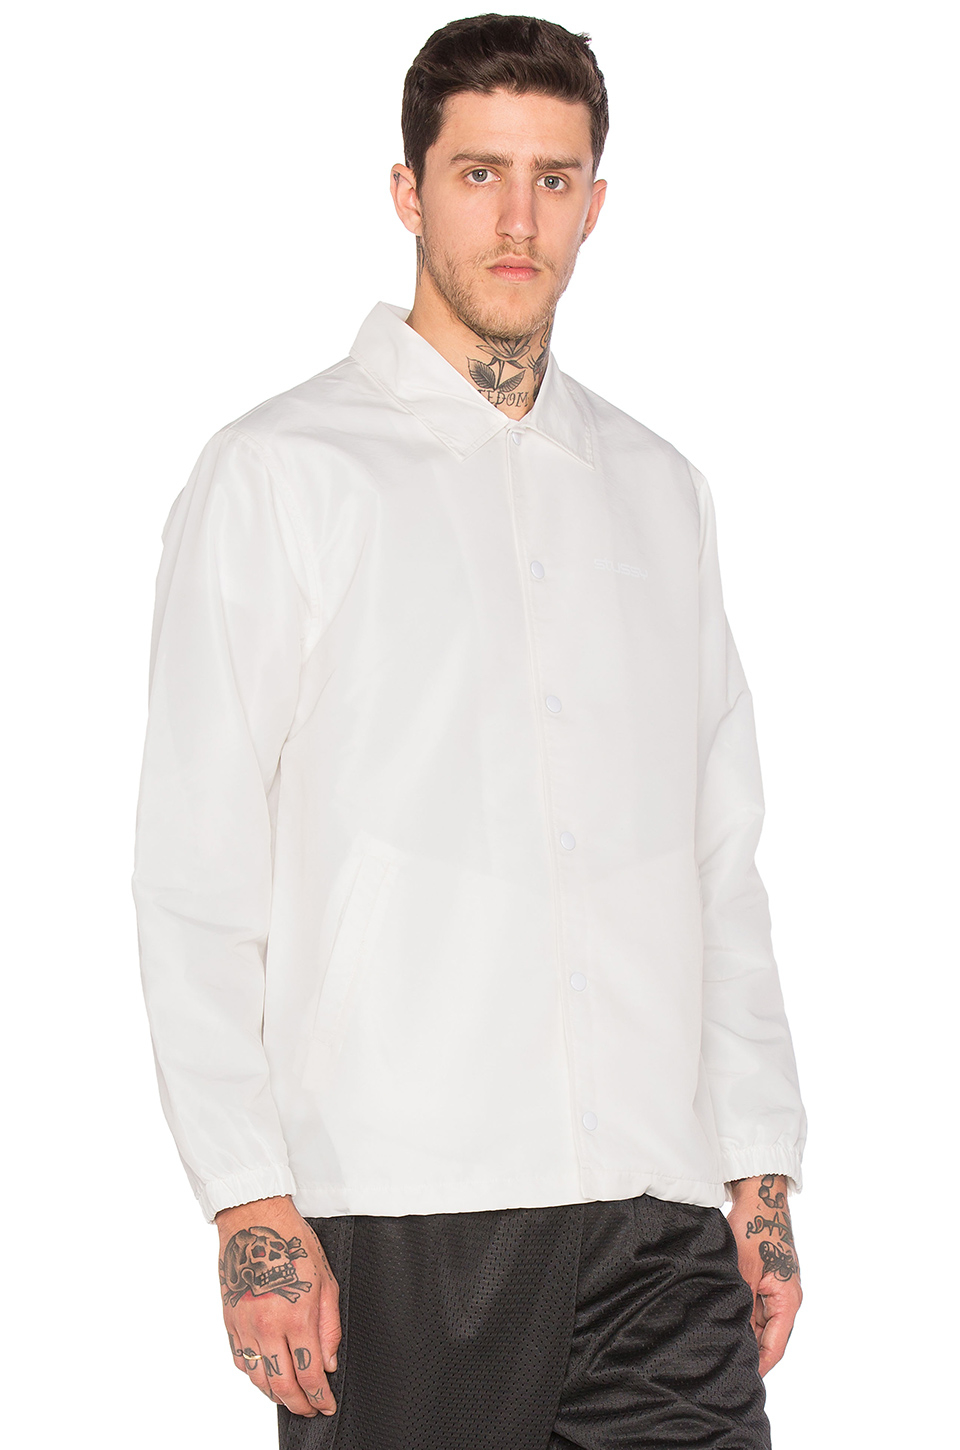 Download Lyst - Stussy Logo Coach Jacket in White for Men